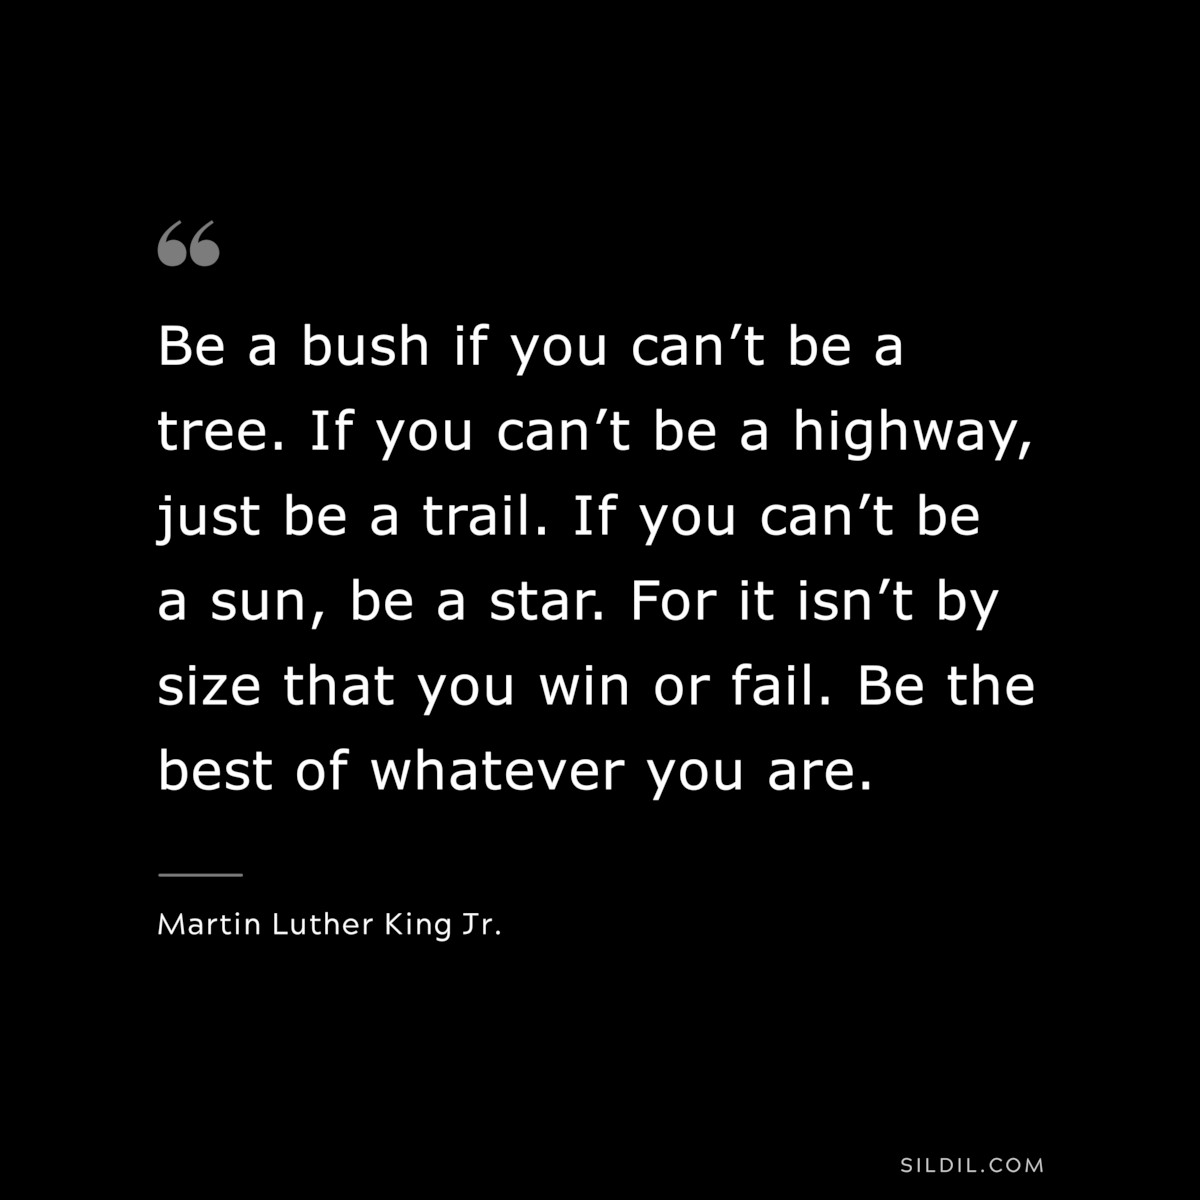 Be a bush if you can’t be a tree. If you can’t be a highway, just be a trail. If you can’t be a sun, be a star. For it isn’t by size that you win or fail. Be the best of whatever you are. ― Martin Luther King Jr.